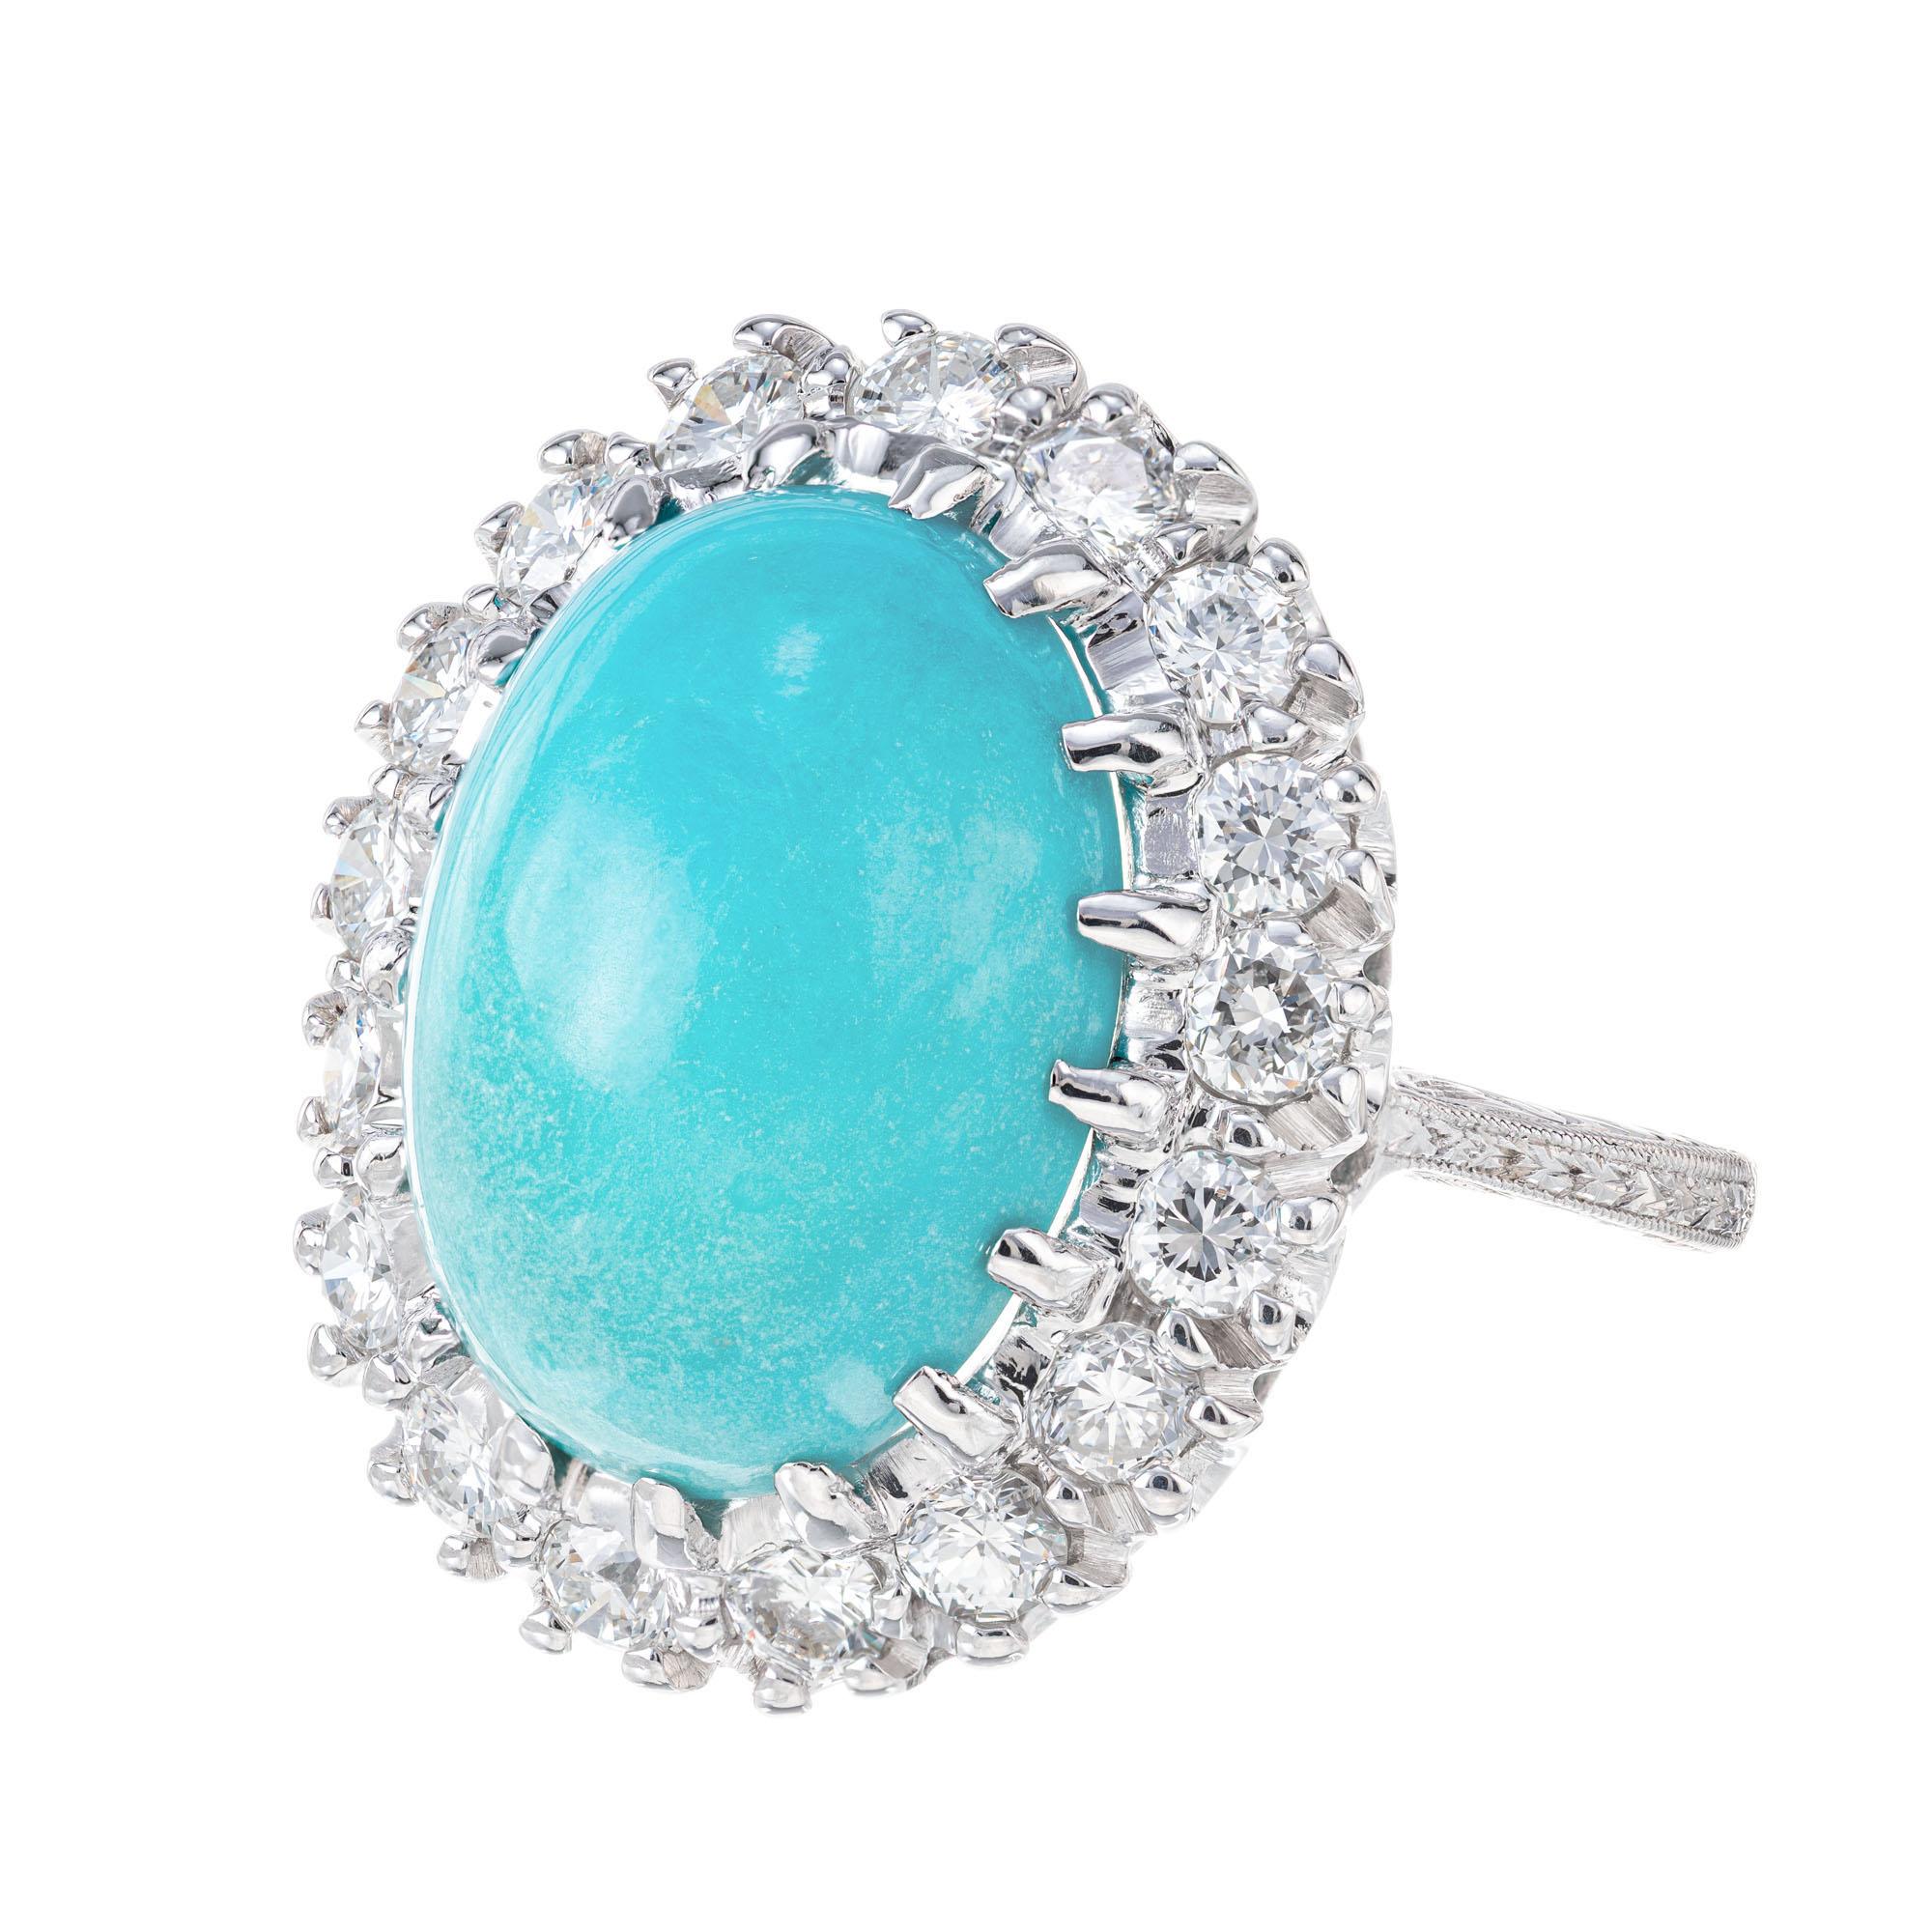 Mid-Century 1950's Persian Turquoise and diamond cocktail ring. GIA certified Oval center stone with a halo of 17 round full cut diamonds in a 14k white gold setting. 

1 oval natural blue to slightly yellow green Persian Turquoise, approx. total